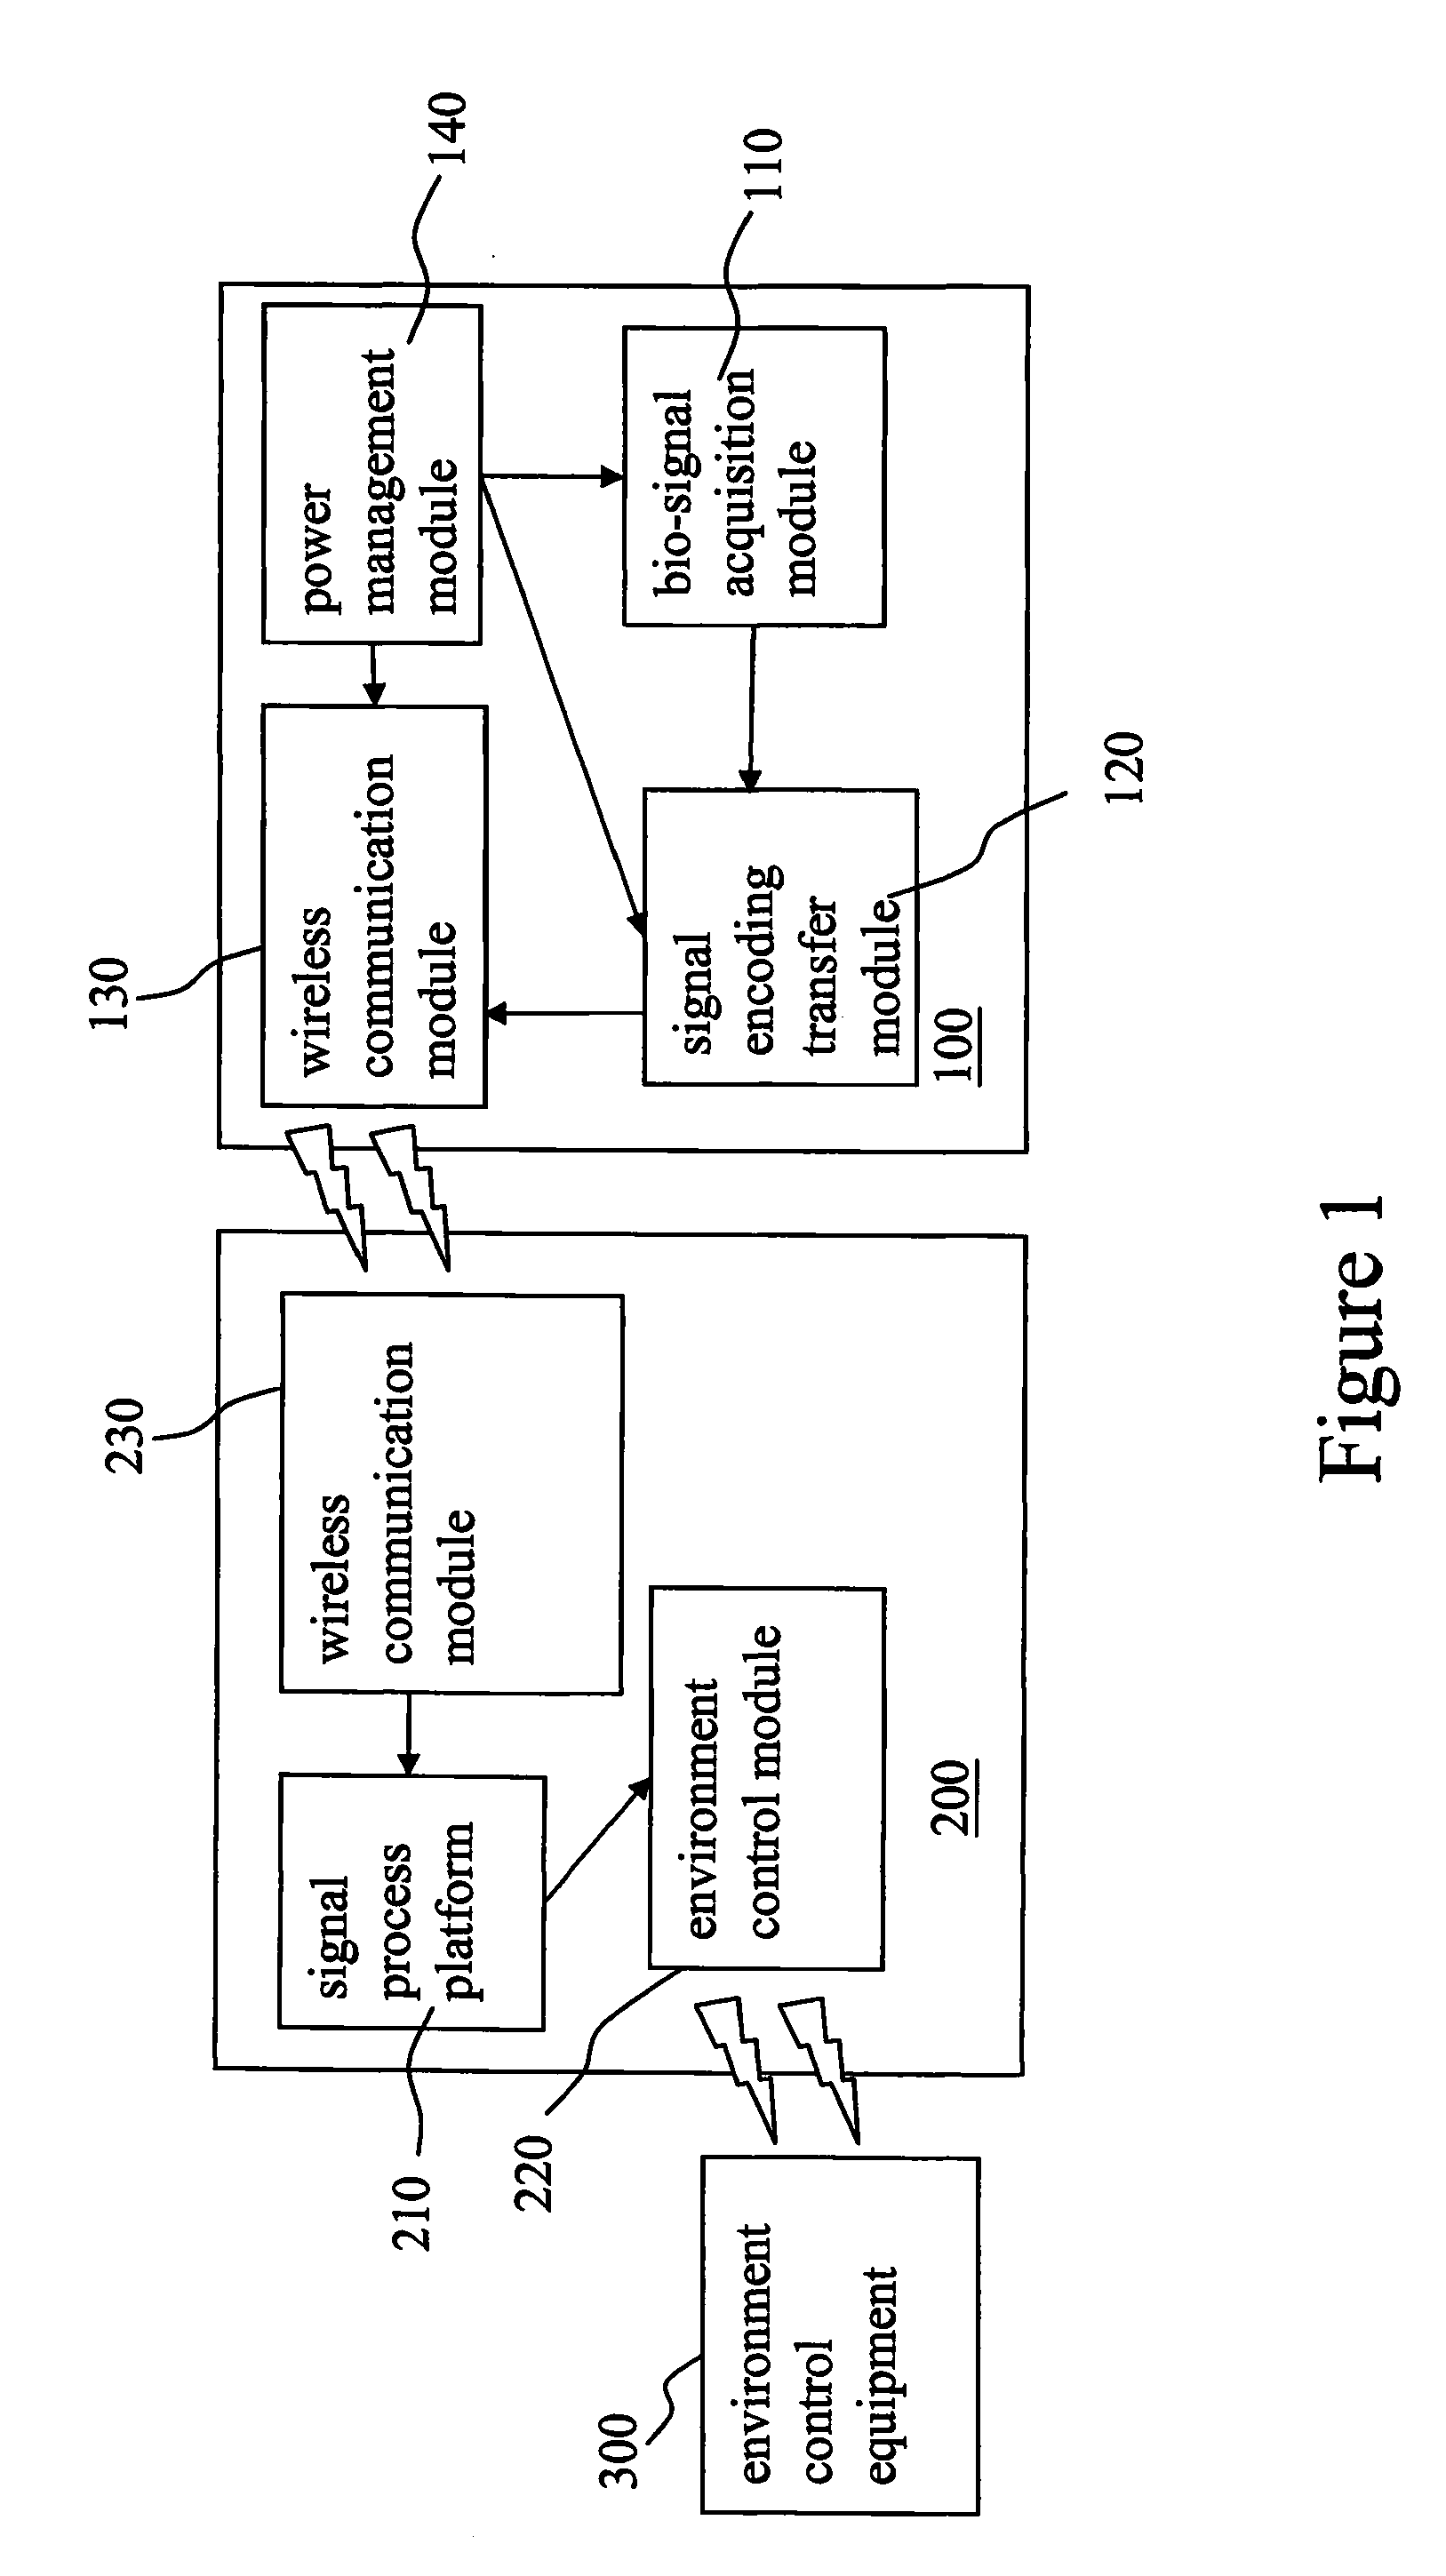 Automatic bio-signal supervising system for medical care